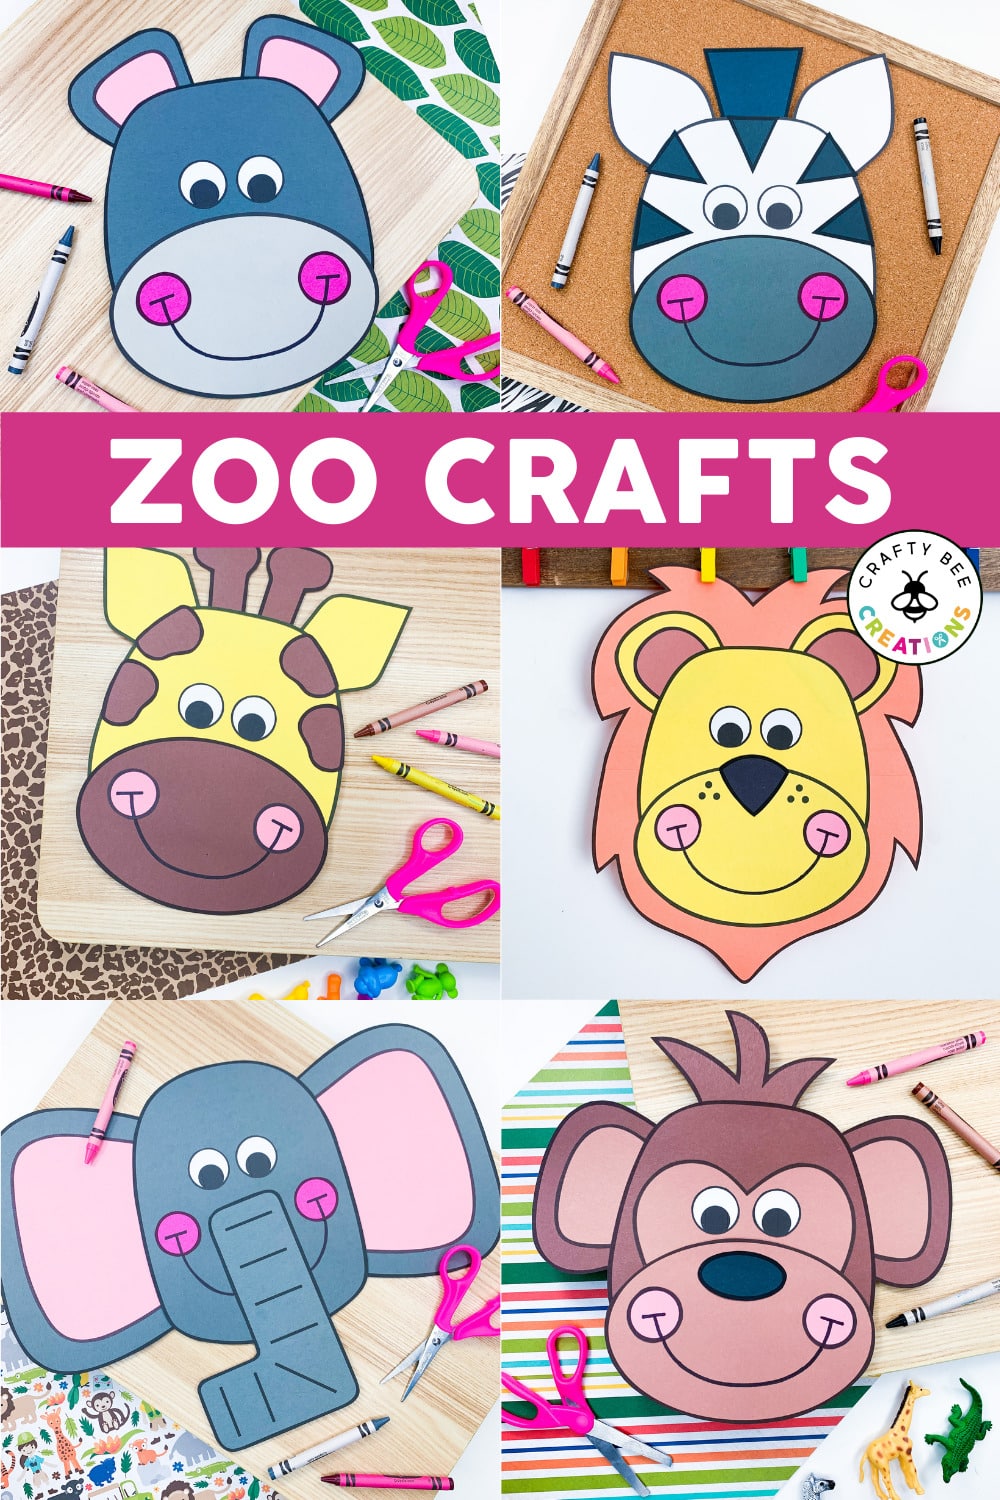 7 Exciting Zoo Animal Crafts for Kids - Crafty Bee Creations